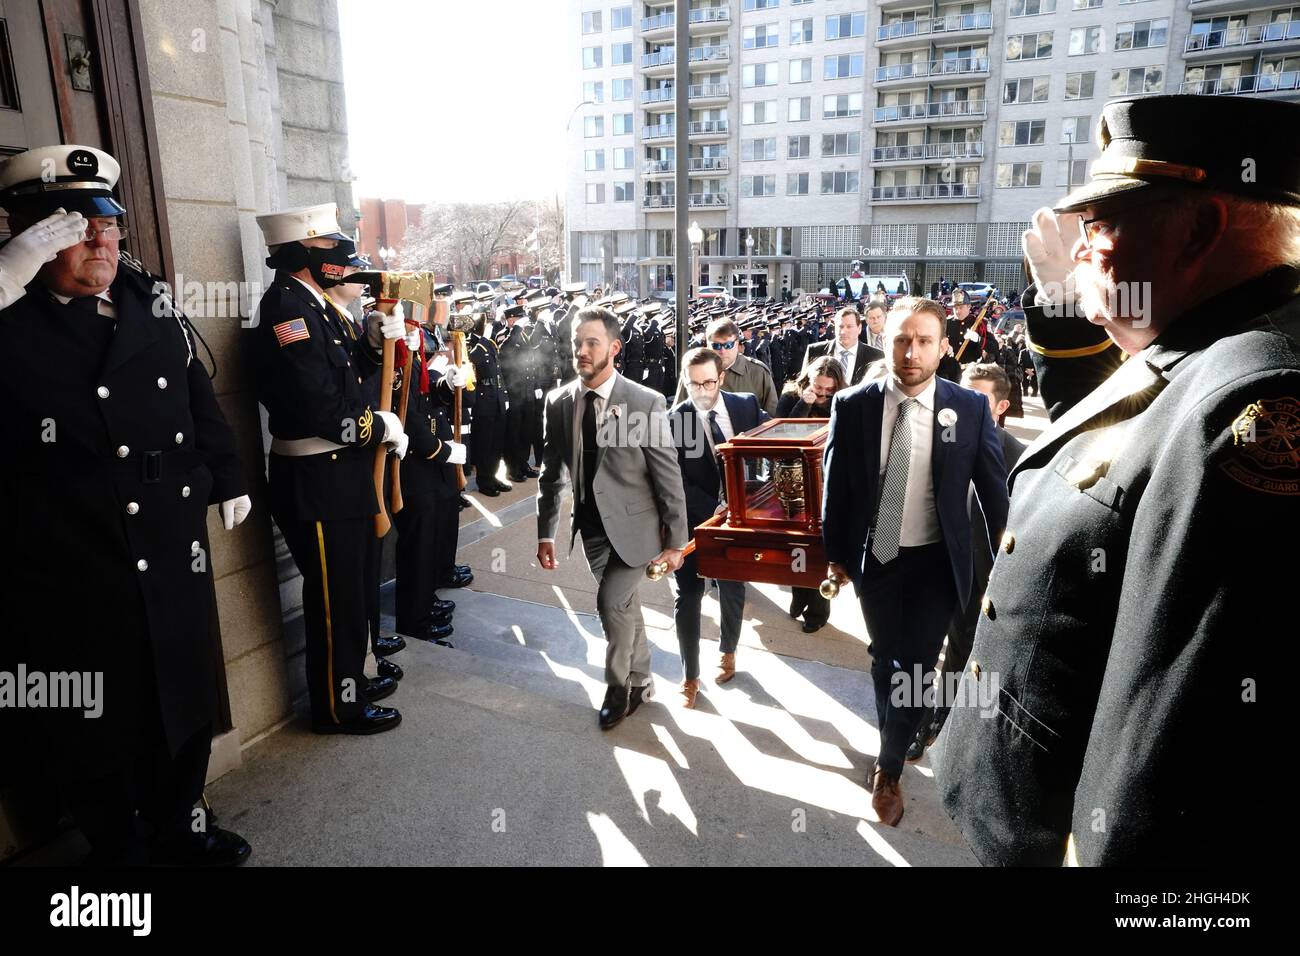 St. Louis, United States. 21st Jan, 2022. The remains of St. Louis firefighter Ben Polson are carried into the Cathedral Basilica of Saint Louis, before services for the 33 year old in St. Louis on Thursday, January 20, 2022. Polson, the first St. Louis firefighter to die in a fire in twenty years, died while battling a vacant house fire on January 13, 2022. Photo by Bill Greenblatt/UPI Credit: UPI/Alamy Live News Stock Photo